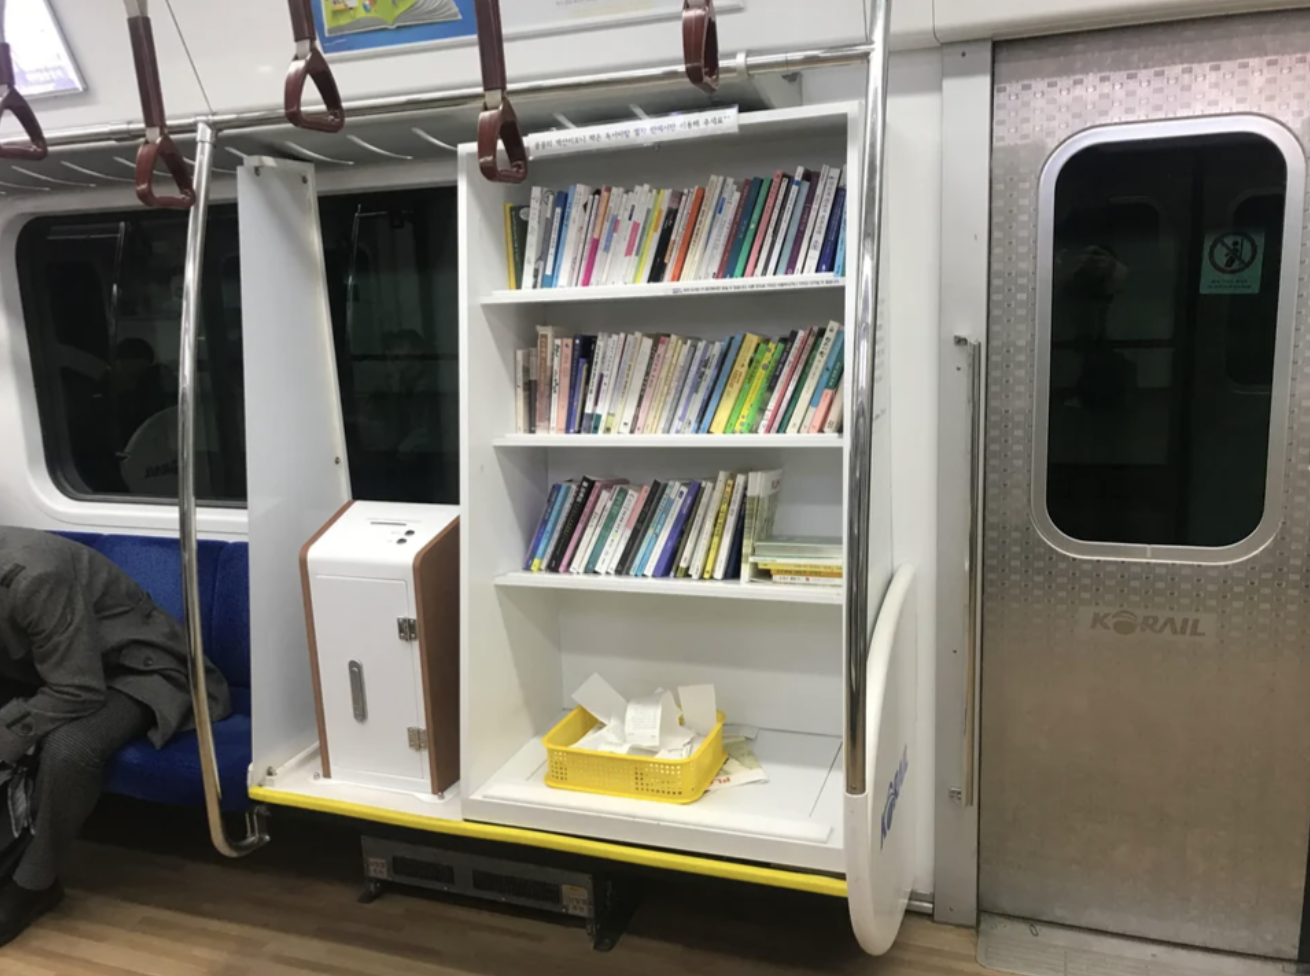 little library shelf in the subway car